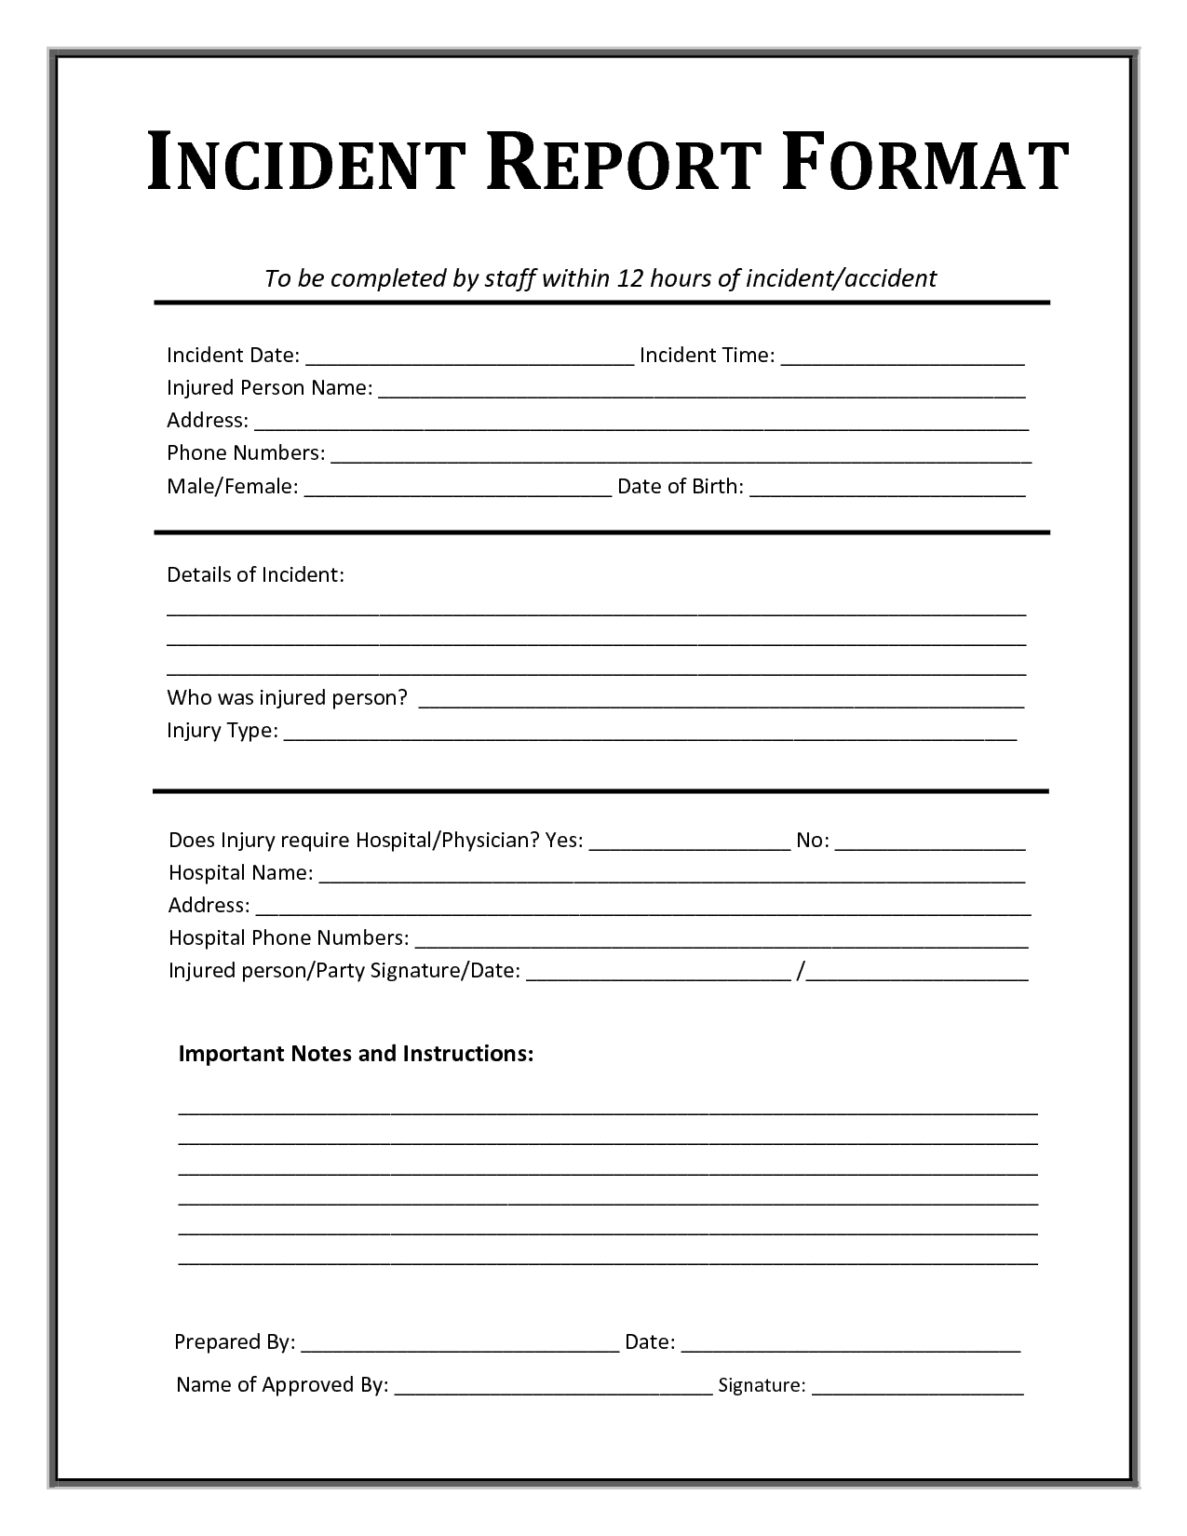 General Incident Report Colona rsd7 For Office Incident Report 